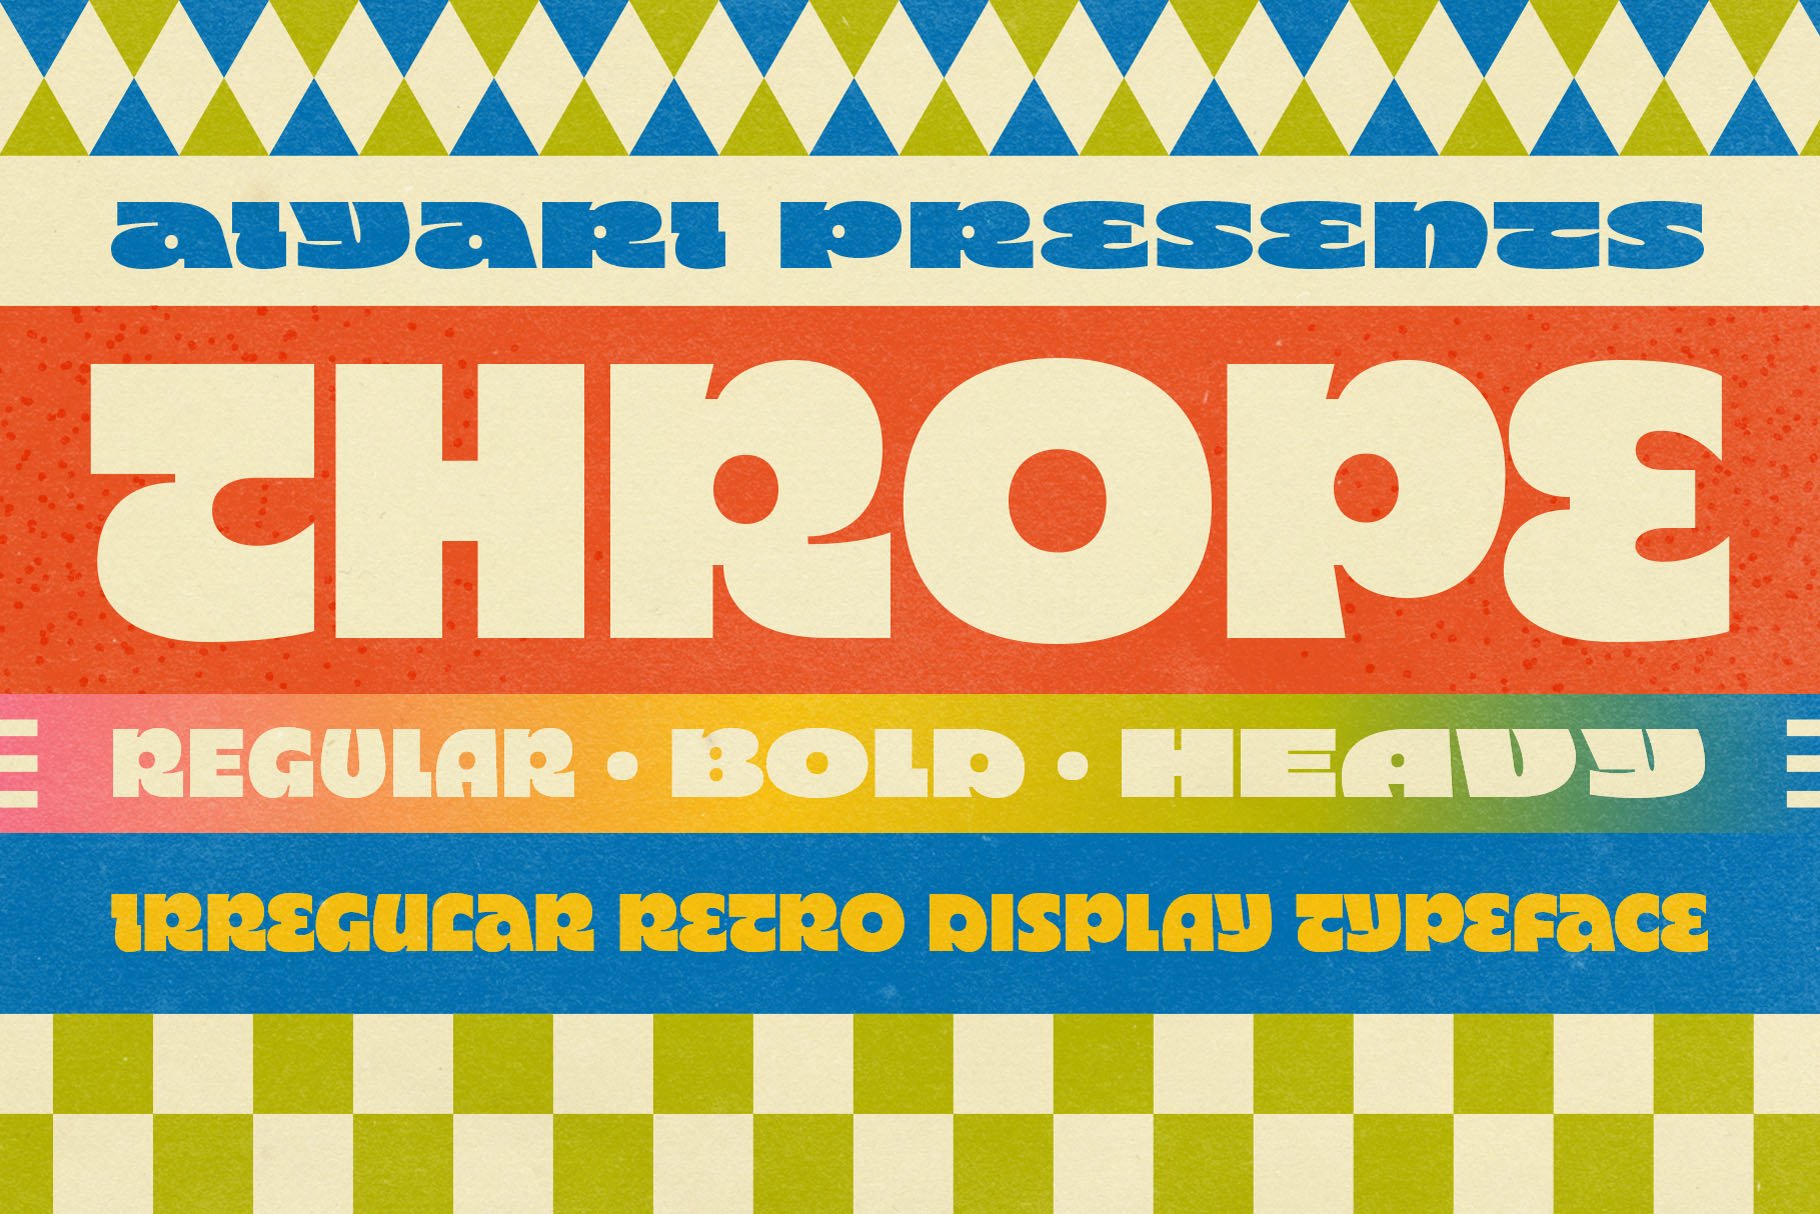 Thrope Font Family cover image.